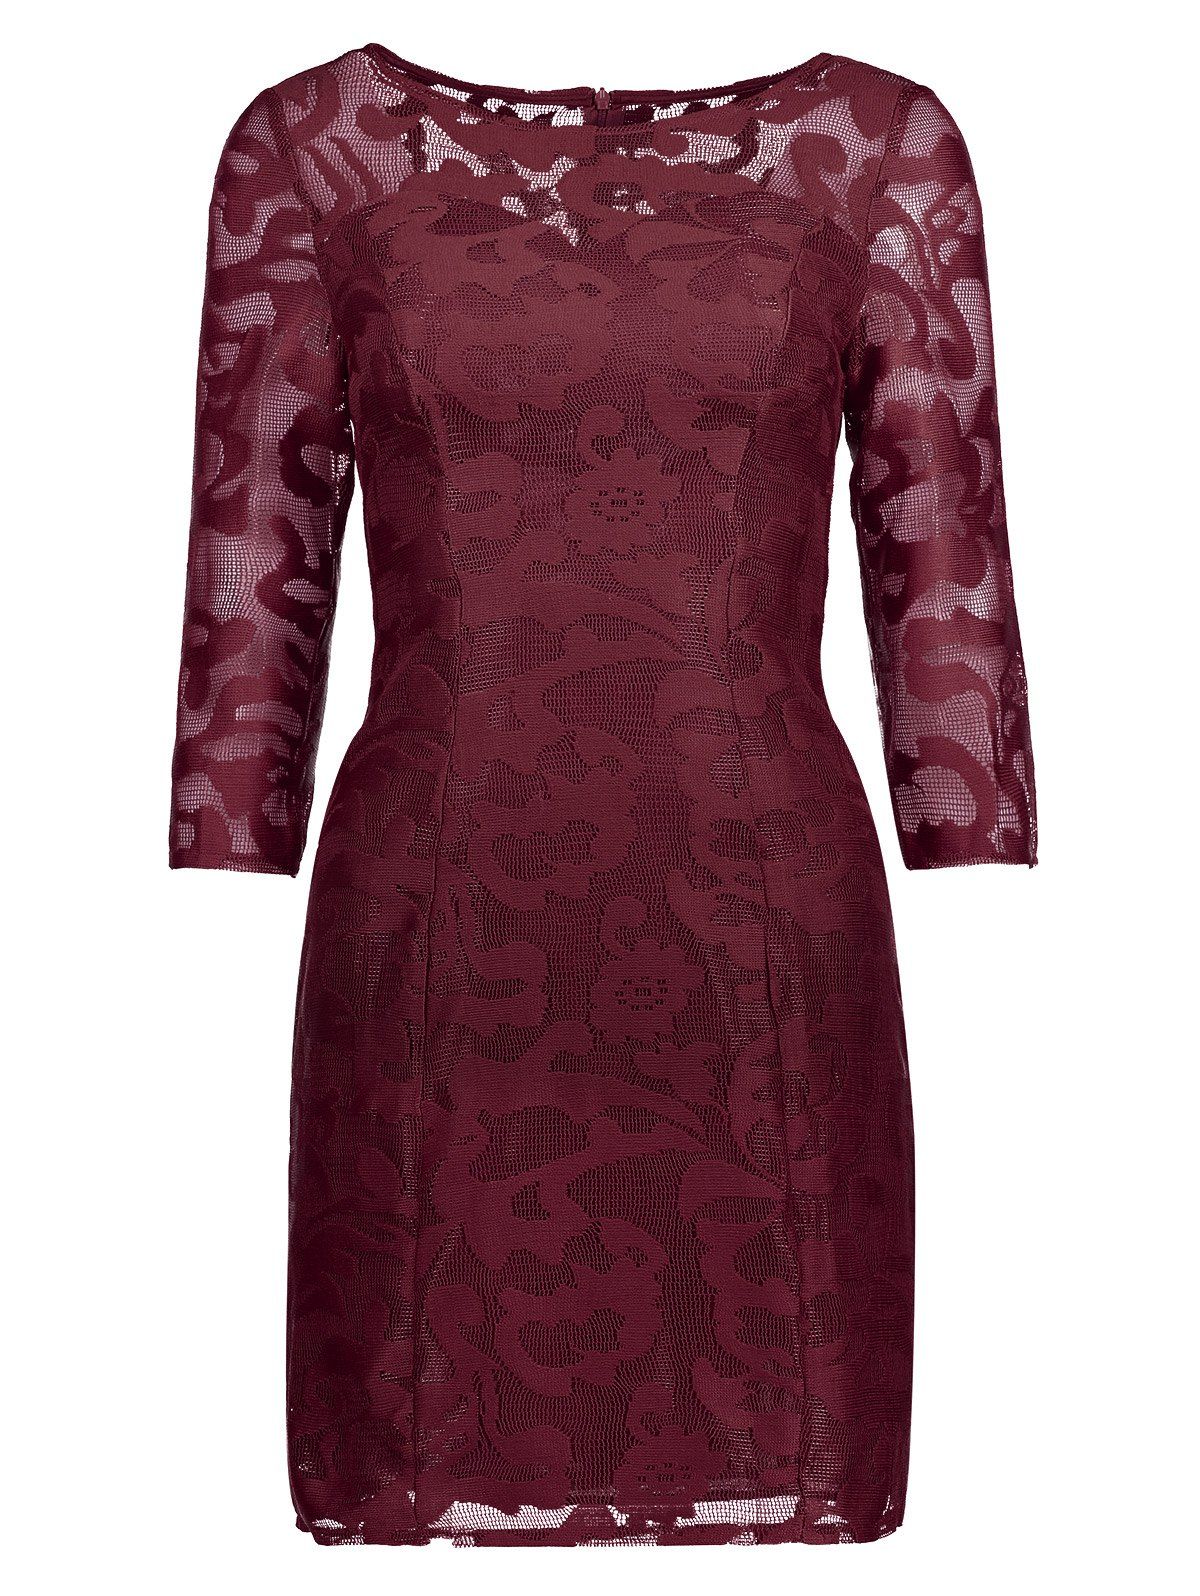 [41% OFF] 2021 Lace See Thru Short Cocktail Dress With Sleeves In WINE ...